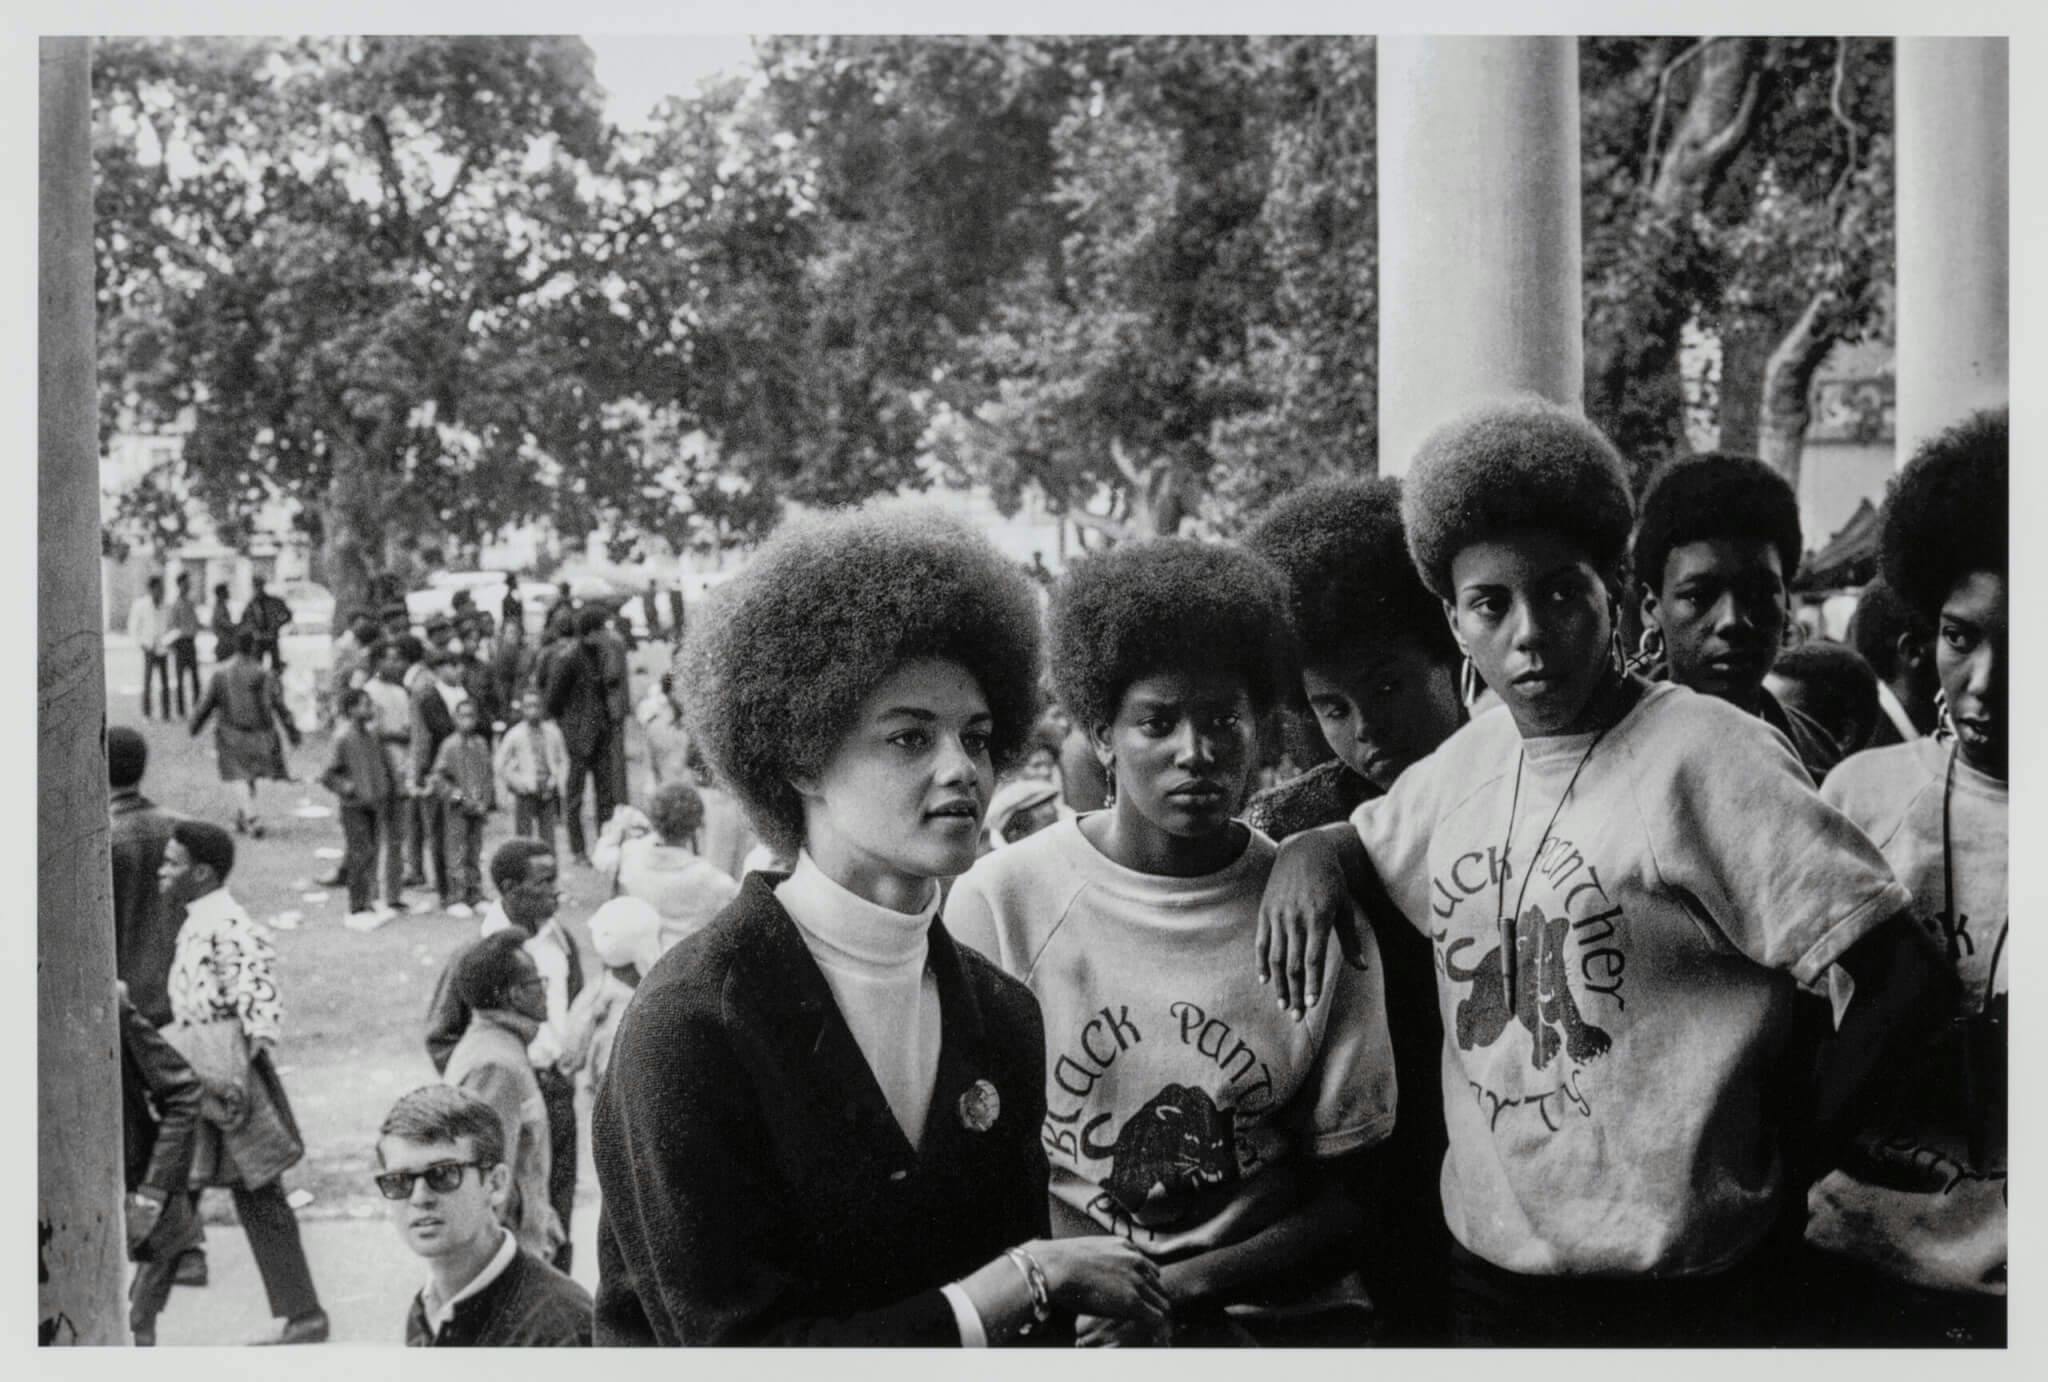 Young women of the Black Panthers Party gather at a rally.